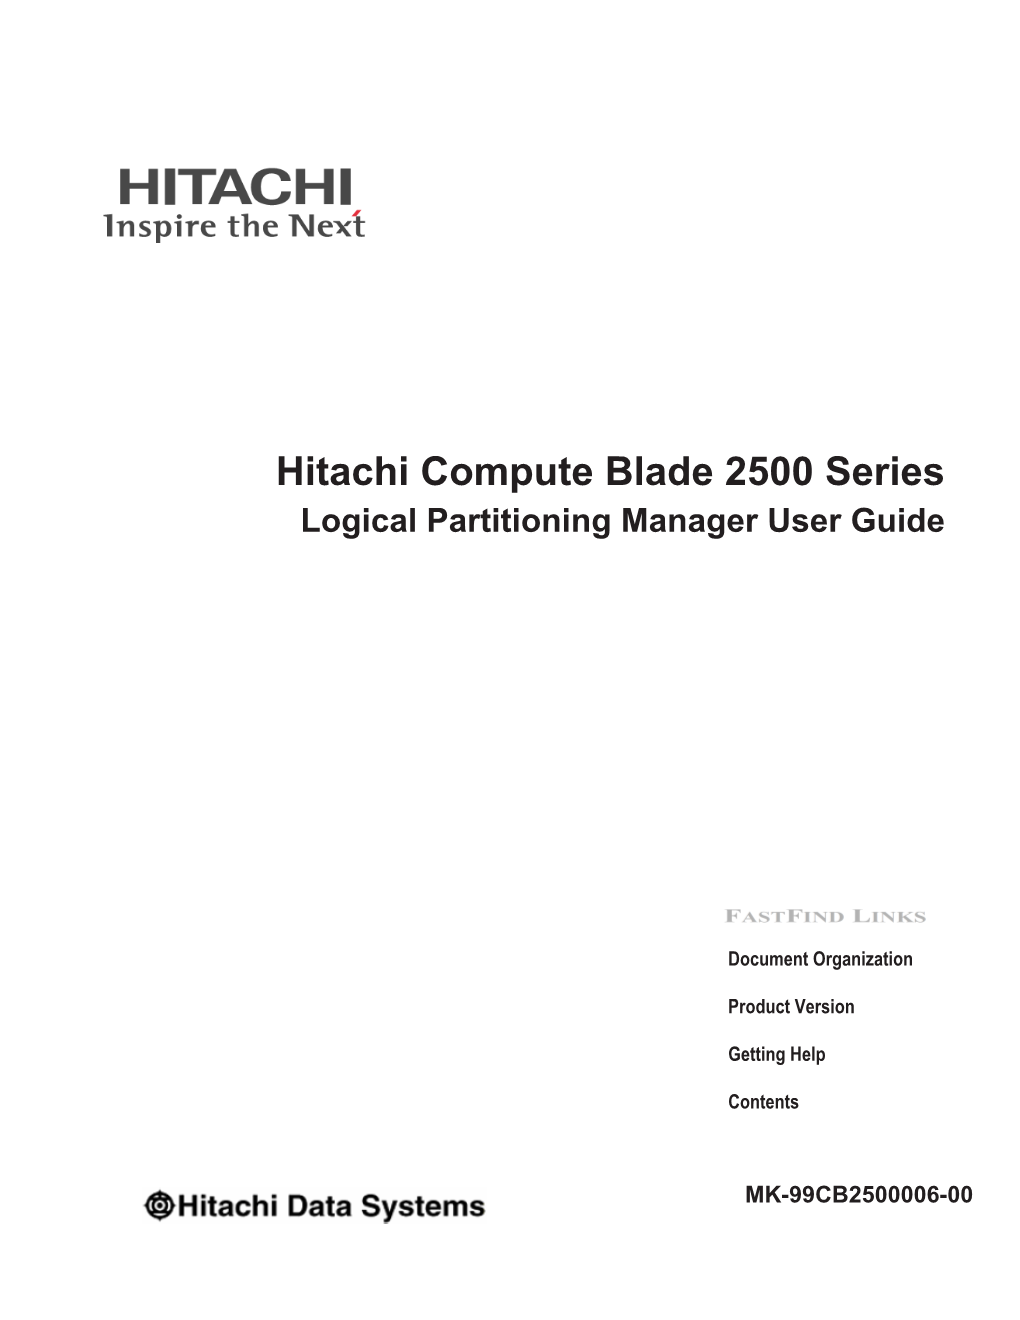 Hitachi Compute Blade 2500 Series Logical Partitioning Manager User Guide